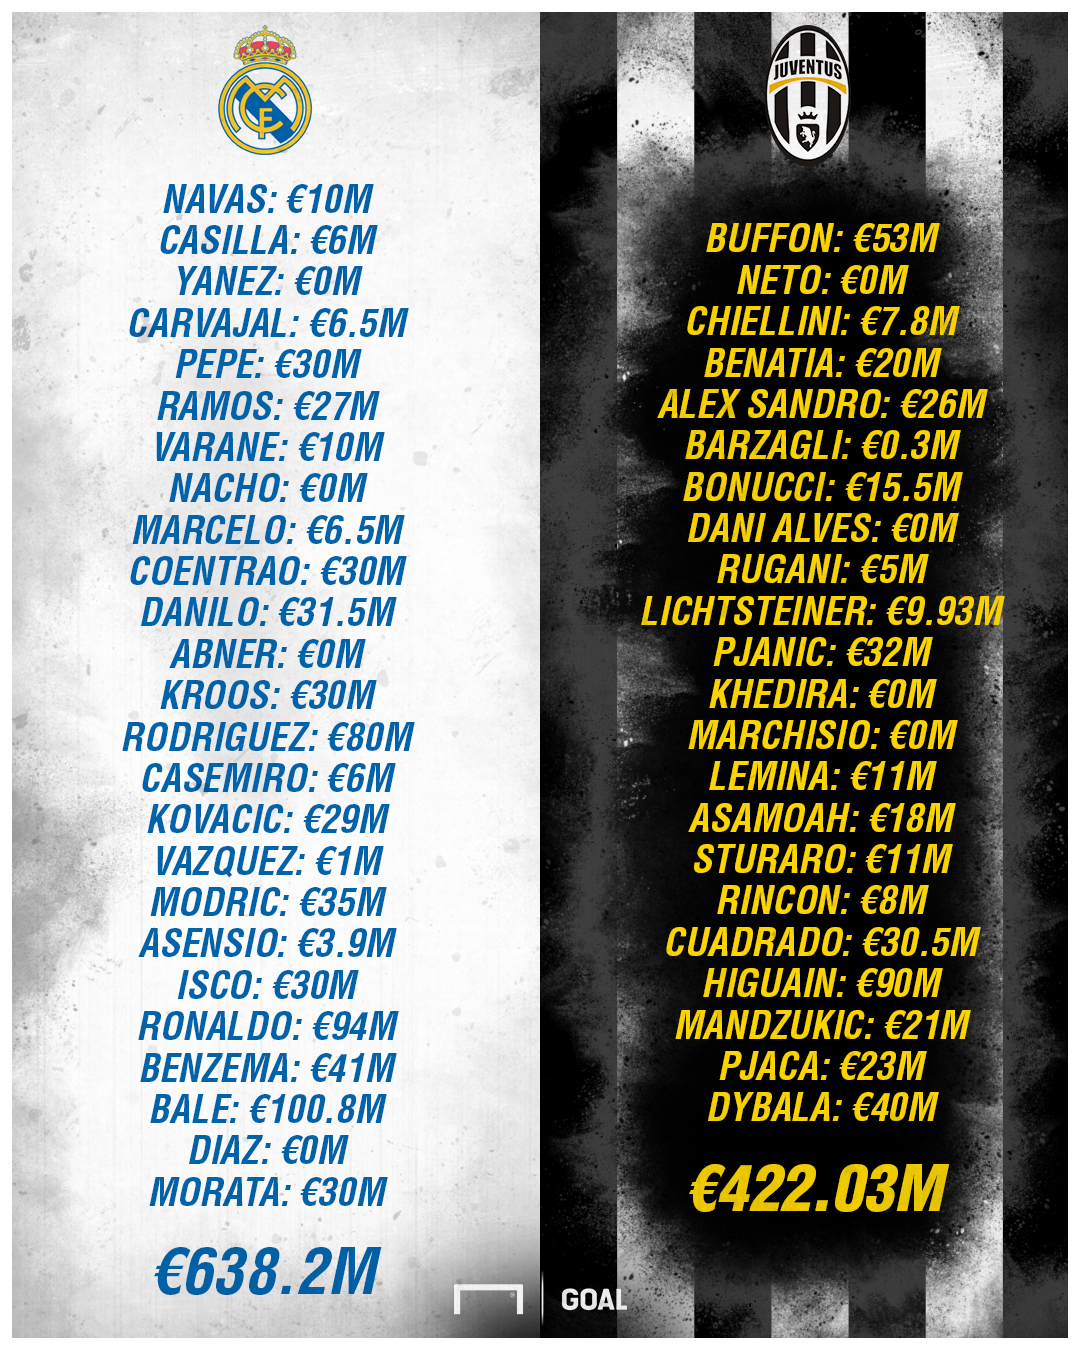 783928_783928_juve-and-madrid-squad-cost